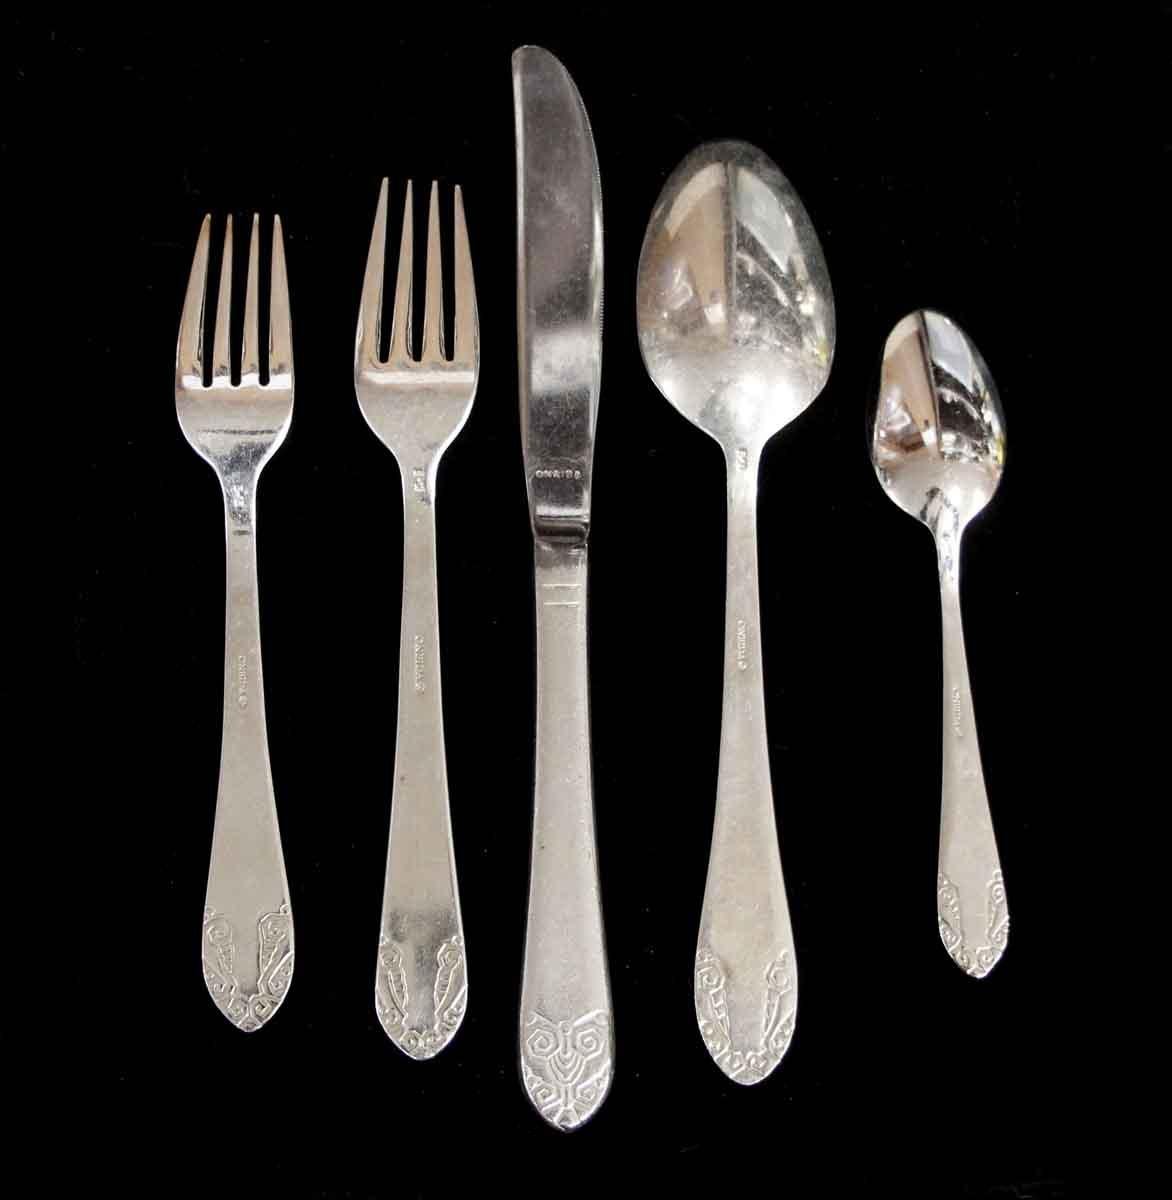 Five piece flatware place setting from the NYC Waldorf Astoria Hotel. The set includes a dinner knife, dinner fork, tablespoon, teaspoon and salad fork. They are made of silver plating over steel. Limited quantities. A Waldorf Astoria authenticity